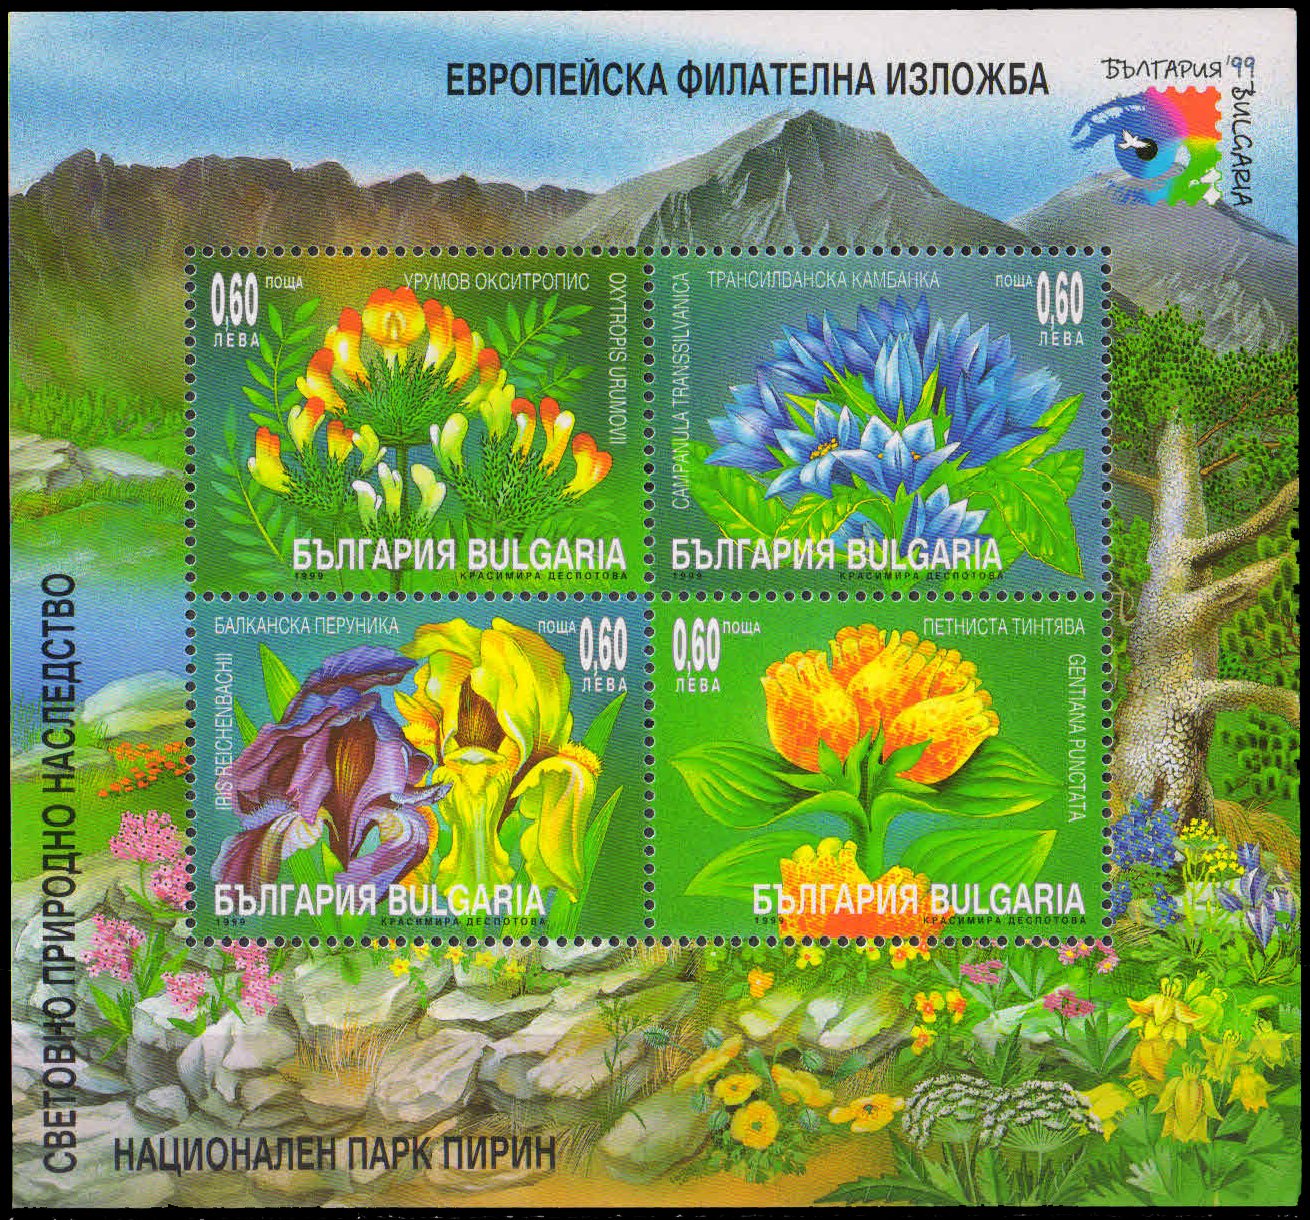 BULGARIA 1999-Flowers in Pirin National Park-European Stamp Exhibition-Sheet of 4, MS-MNH, S.G. MS 4265, Cat � 13.50